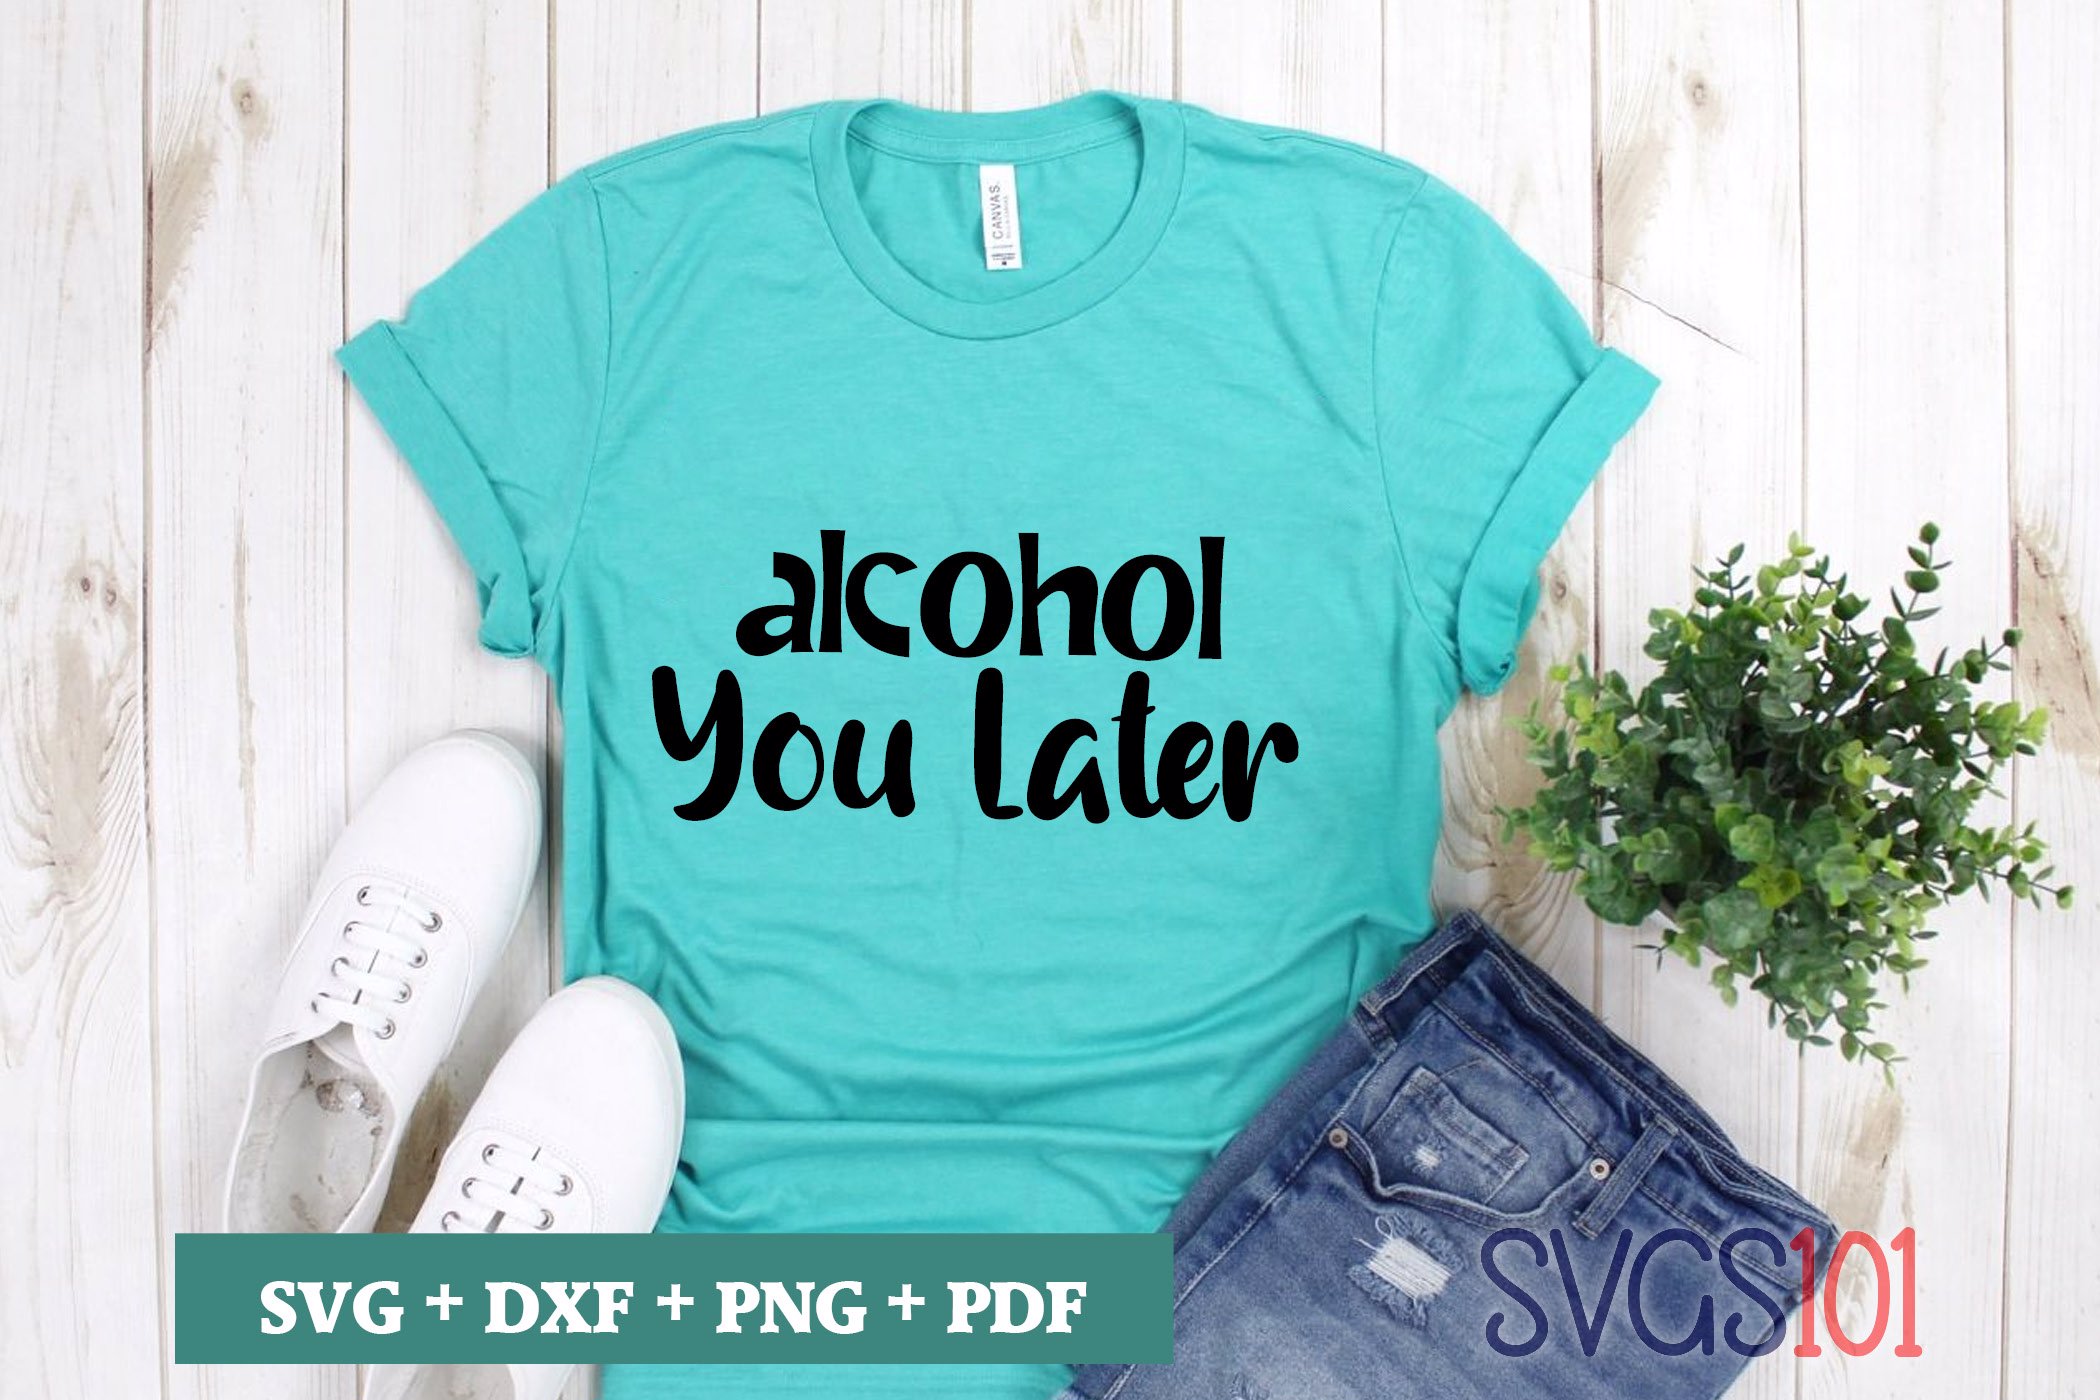 Download Alcohol You Later SVG Cuttable file - DXF, EPS, PNG, PDF ...